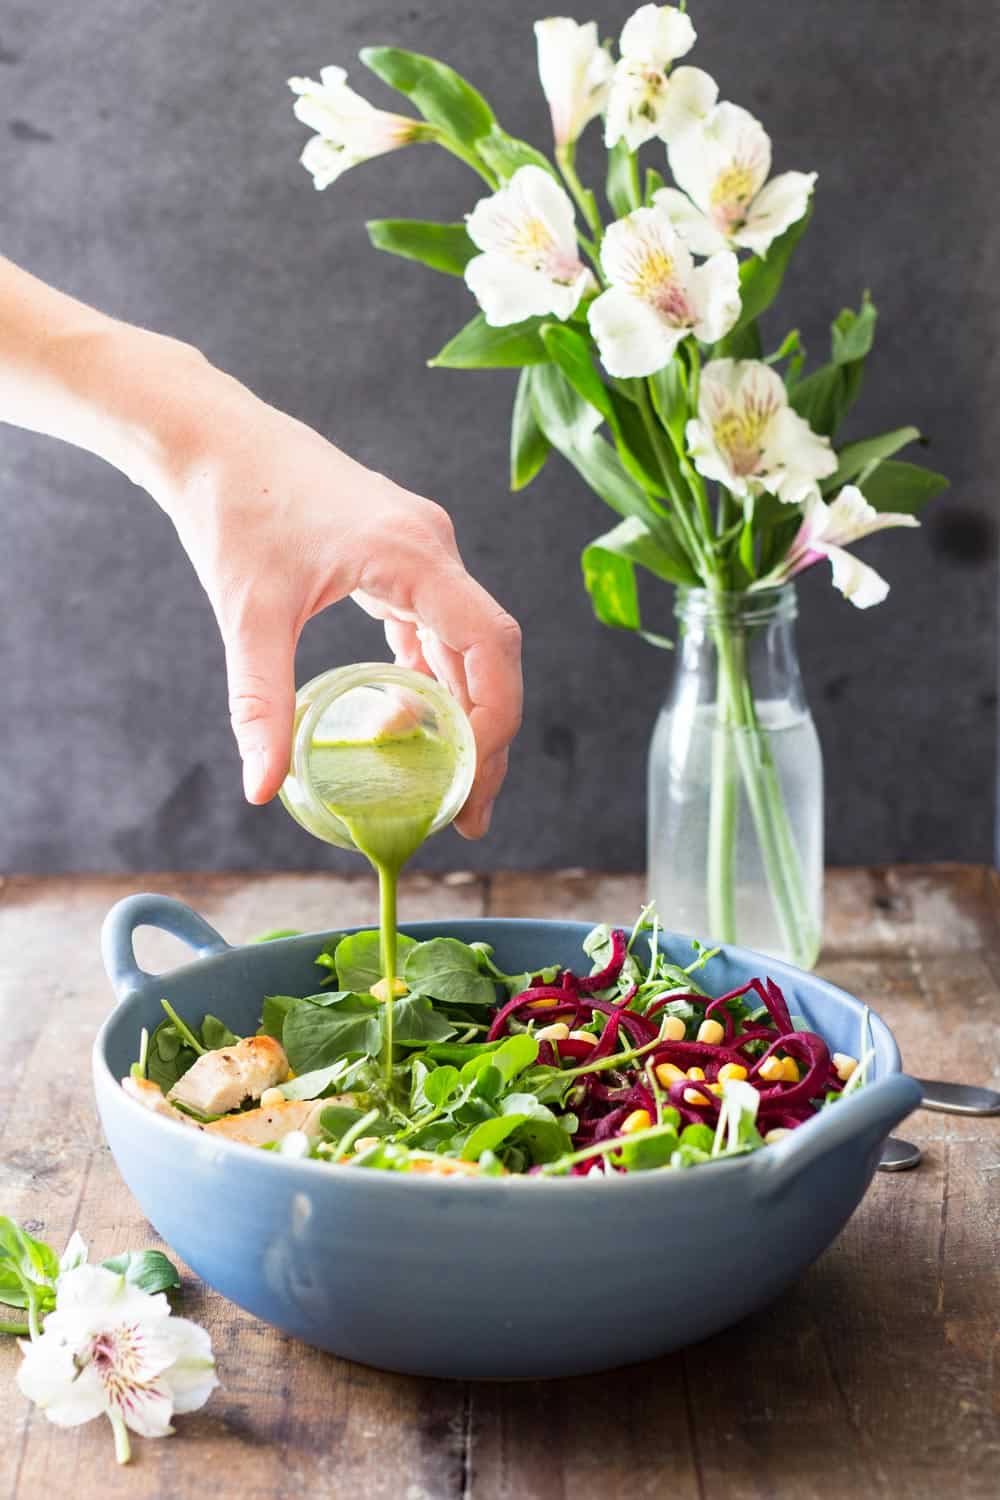 Hand pouring Basil Clementine Dressing over Watercress Salad in a blue bowl, and a vase with flowers.